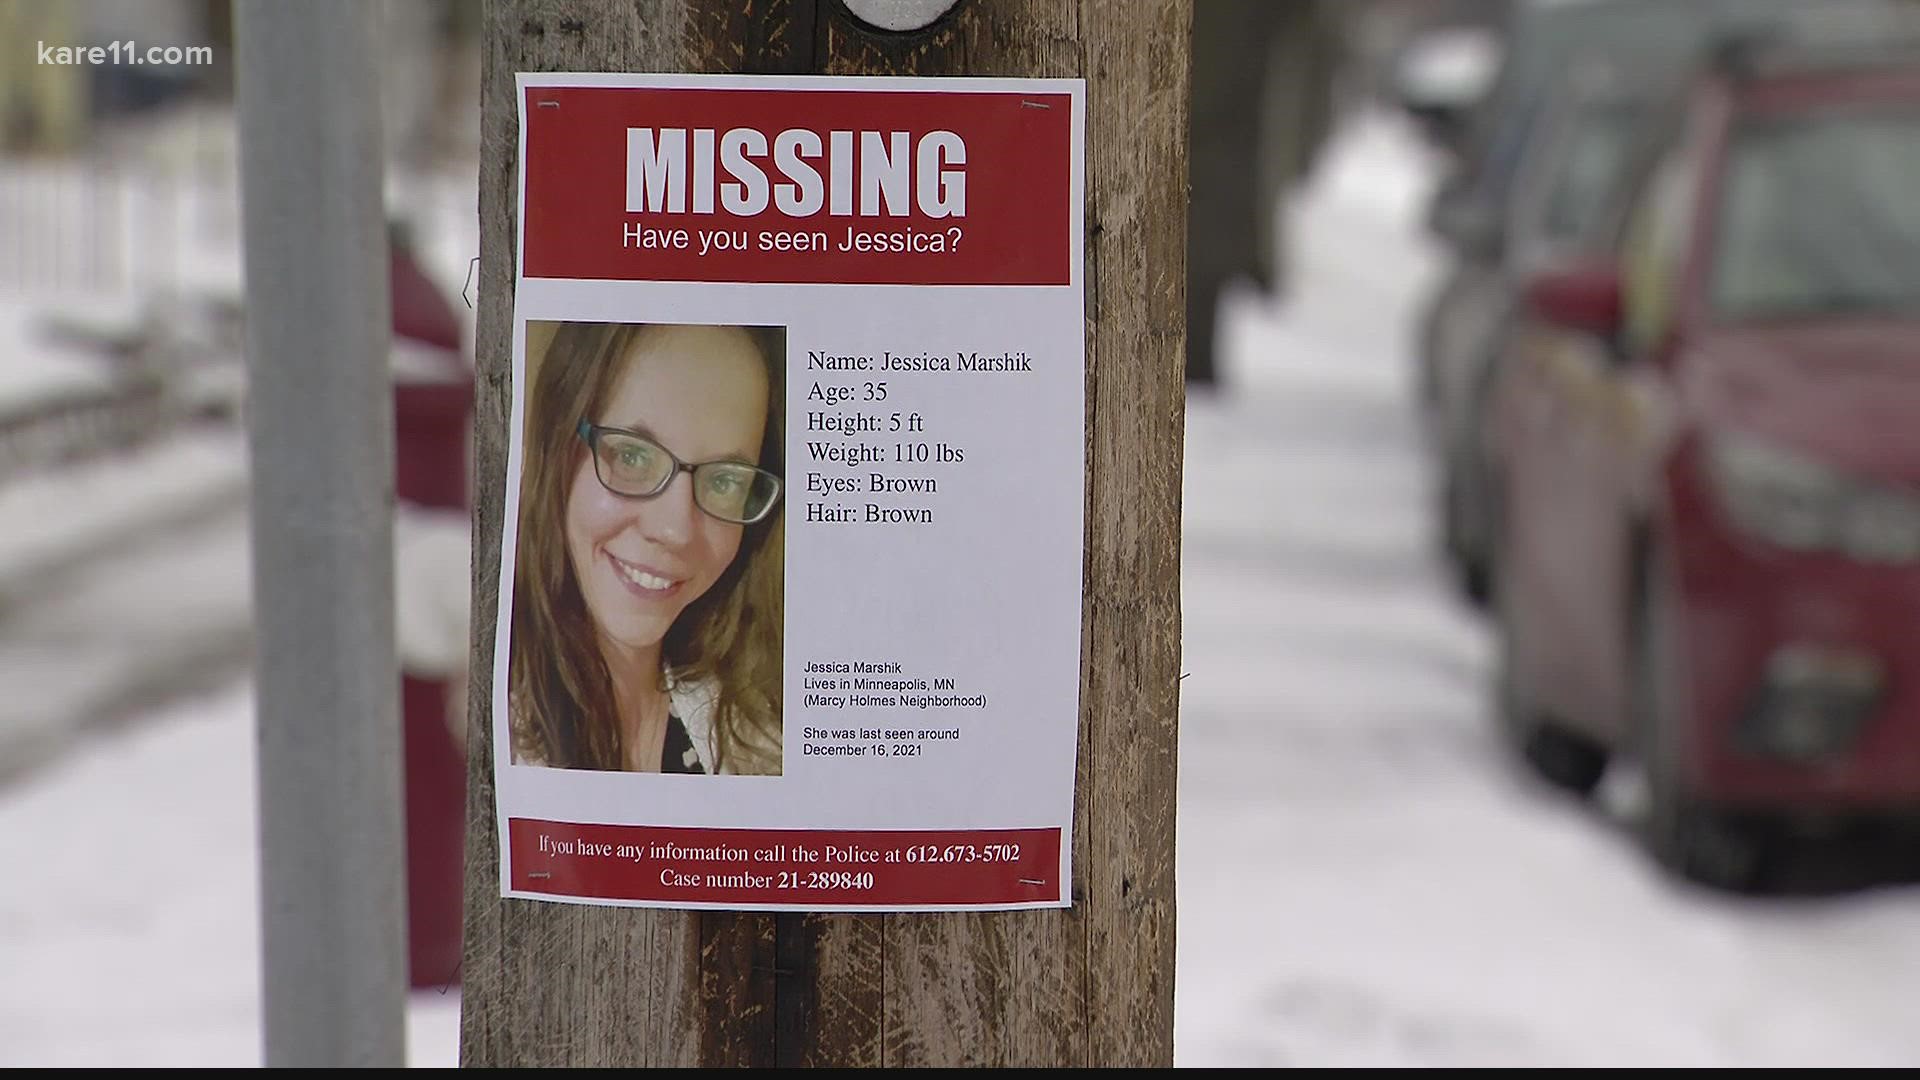 Jessica Marshik was last in contact with her family on December 14th.